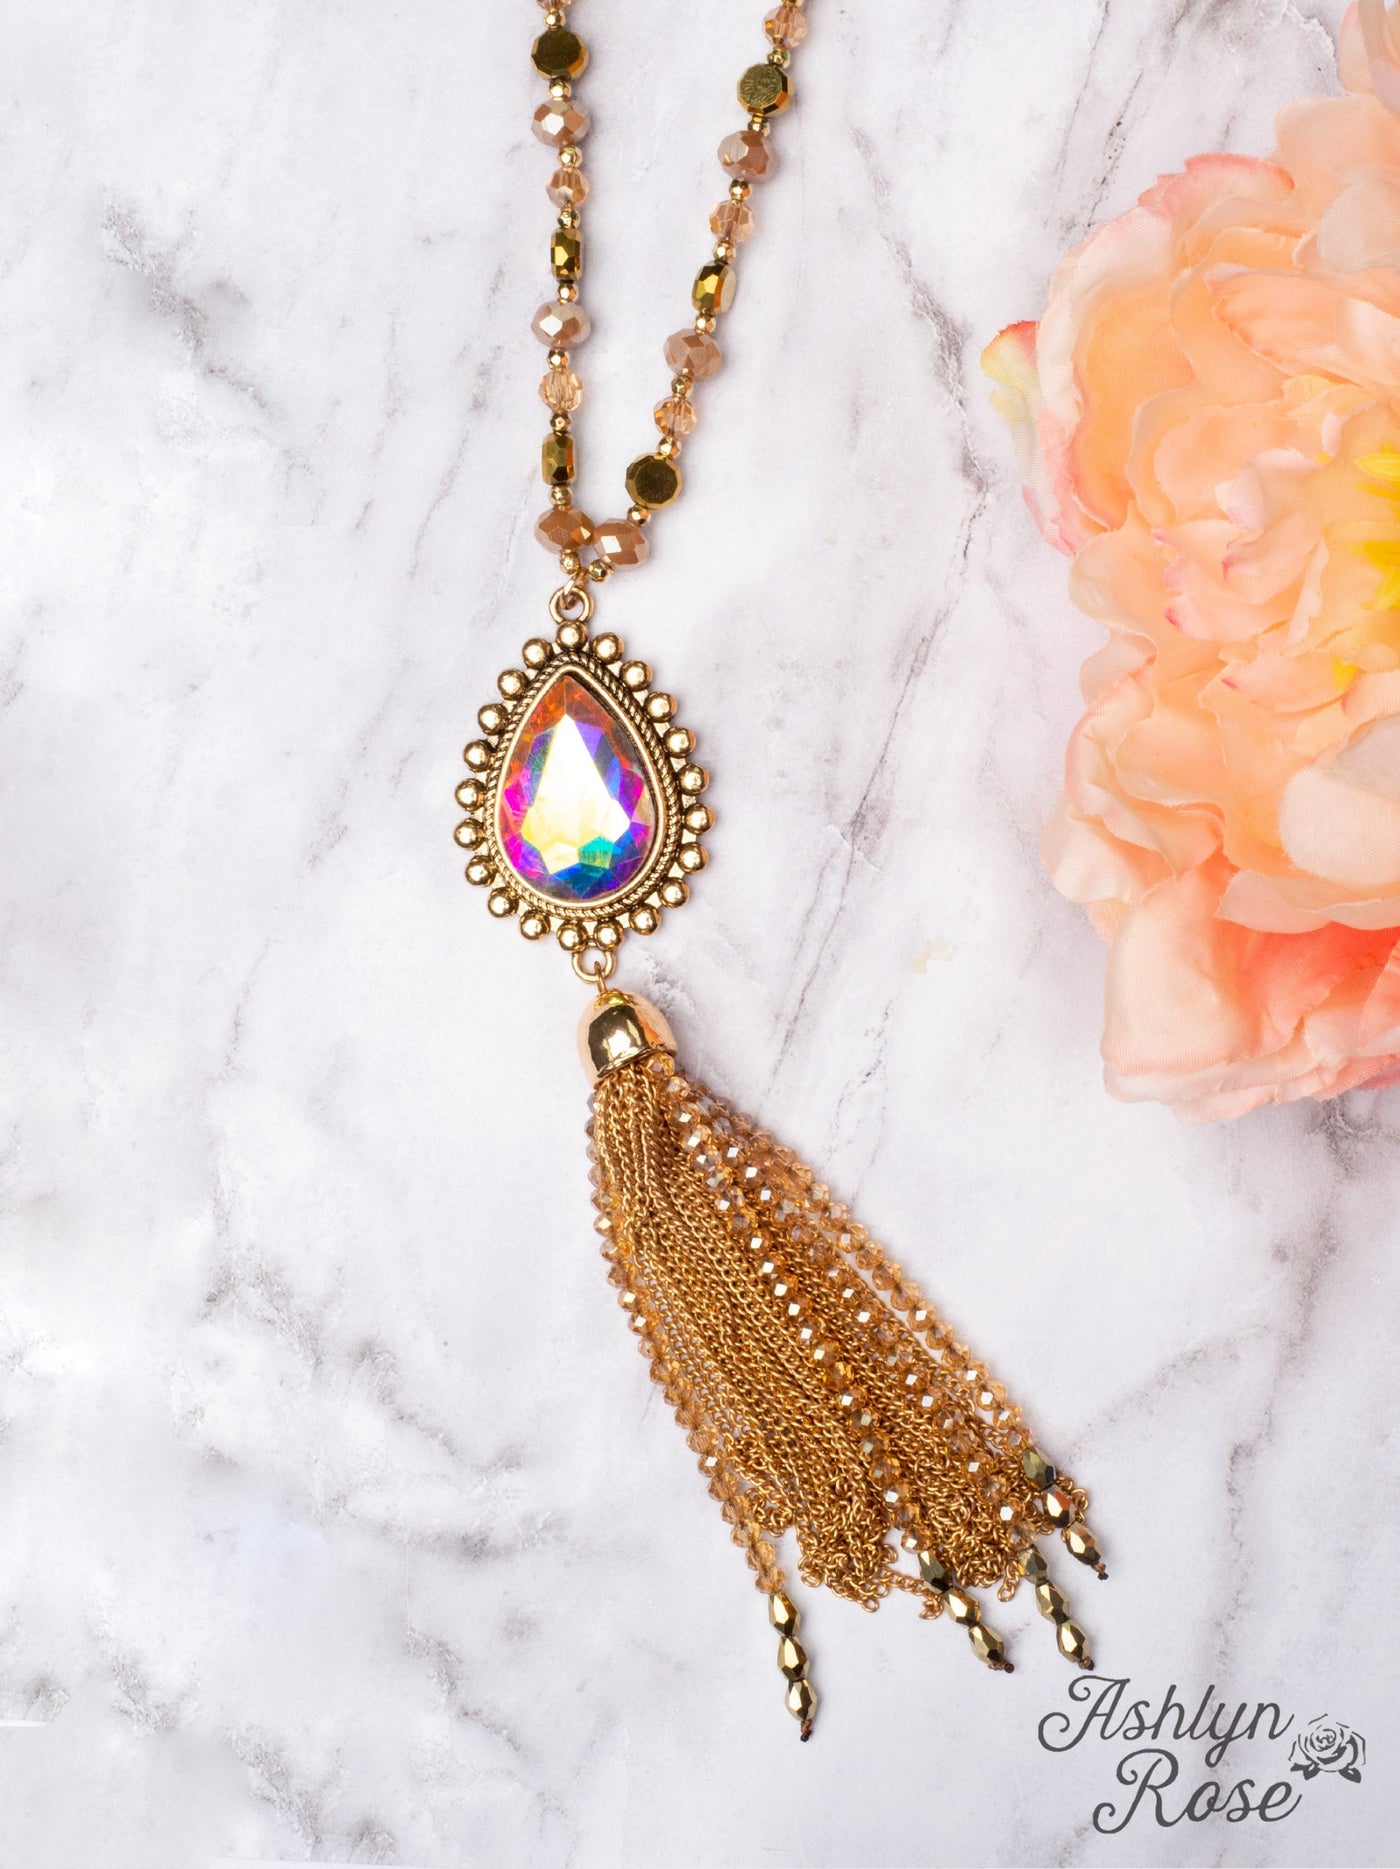 SHINE SO BRIGHT IRIDESCENT OVAL PENDANT GOLD CHAIN TASSEL ON A CRYSTAL BEADED GOLD CHAIN NECKLACE, BROWN